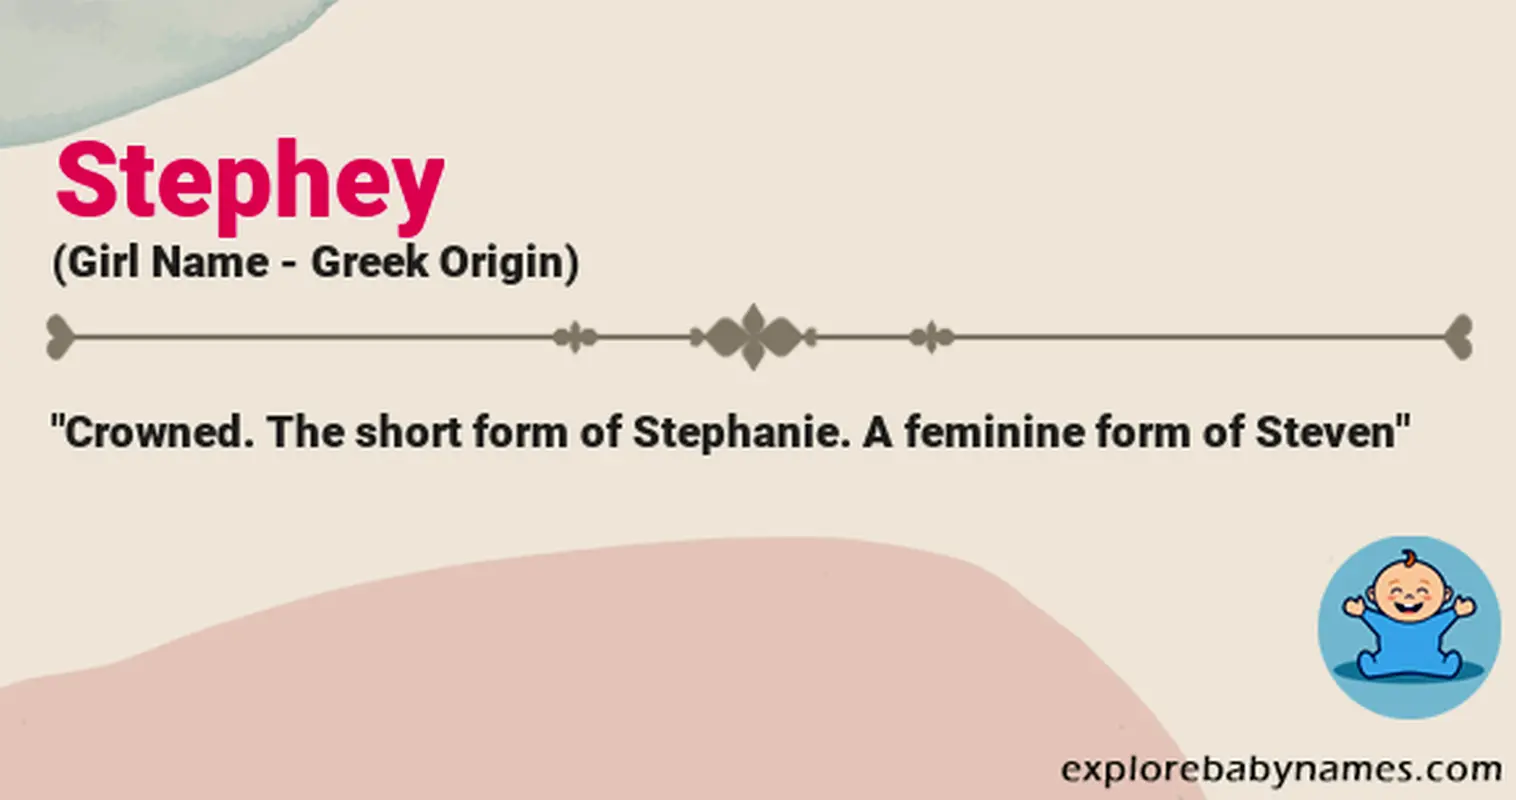 Meaning of Stephey